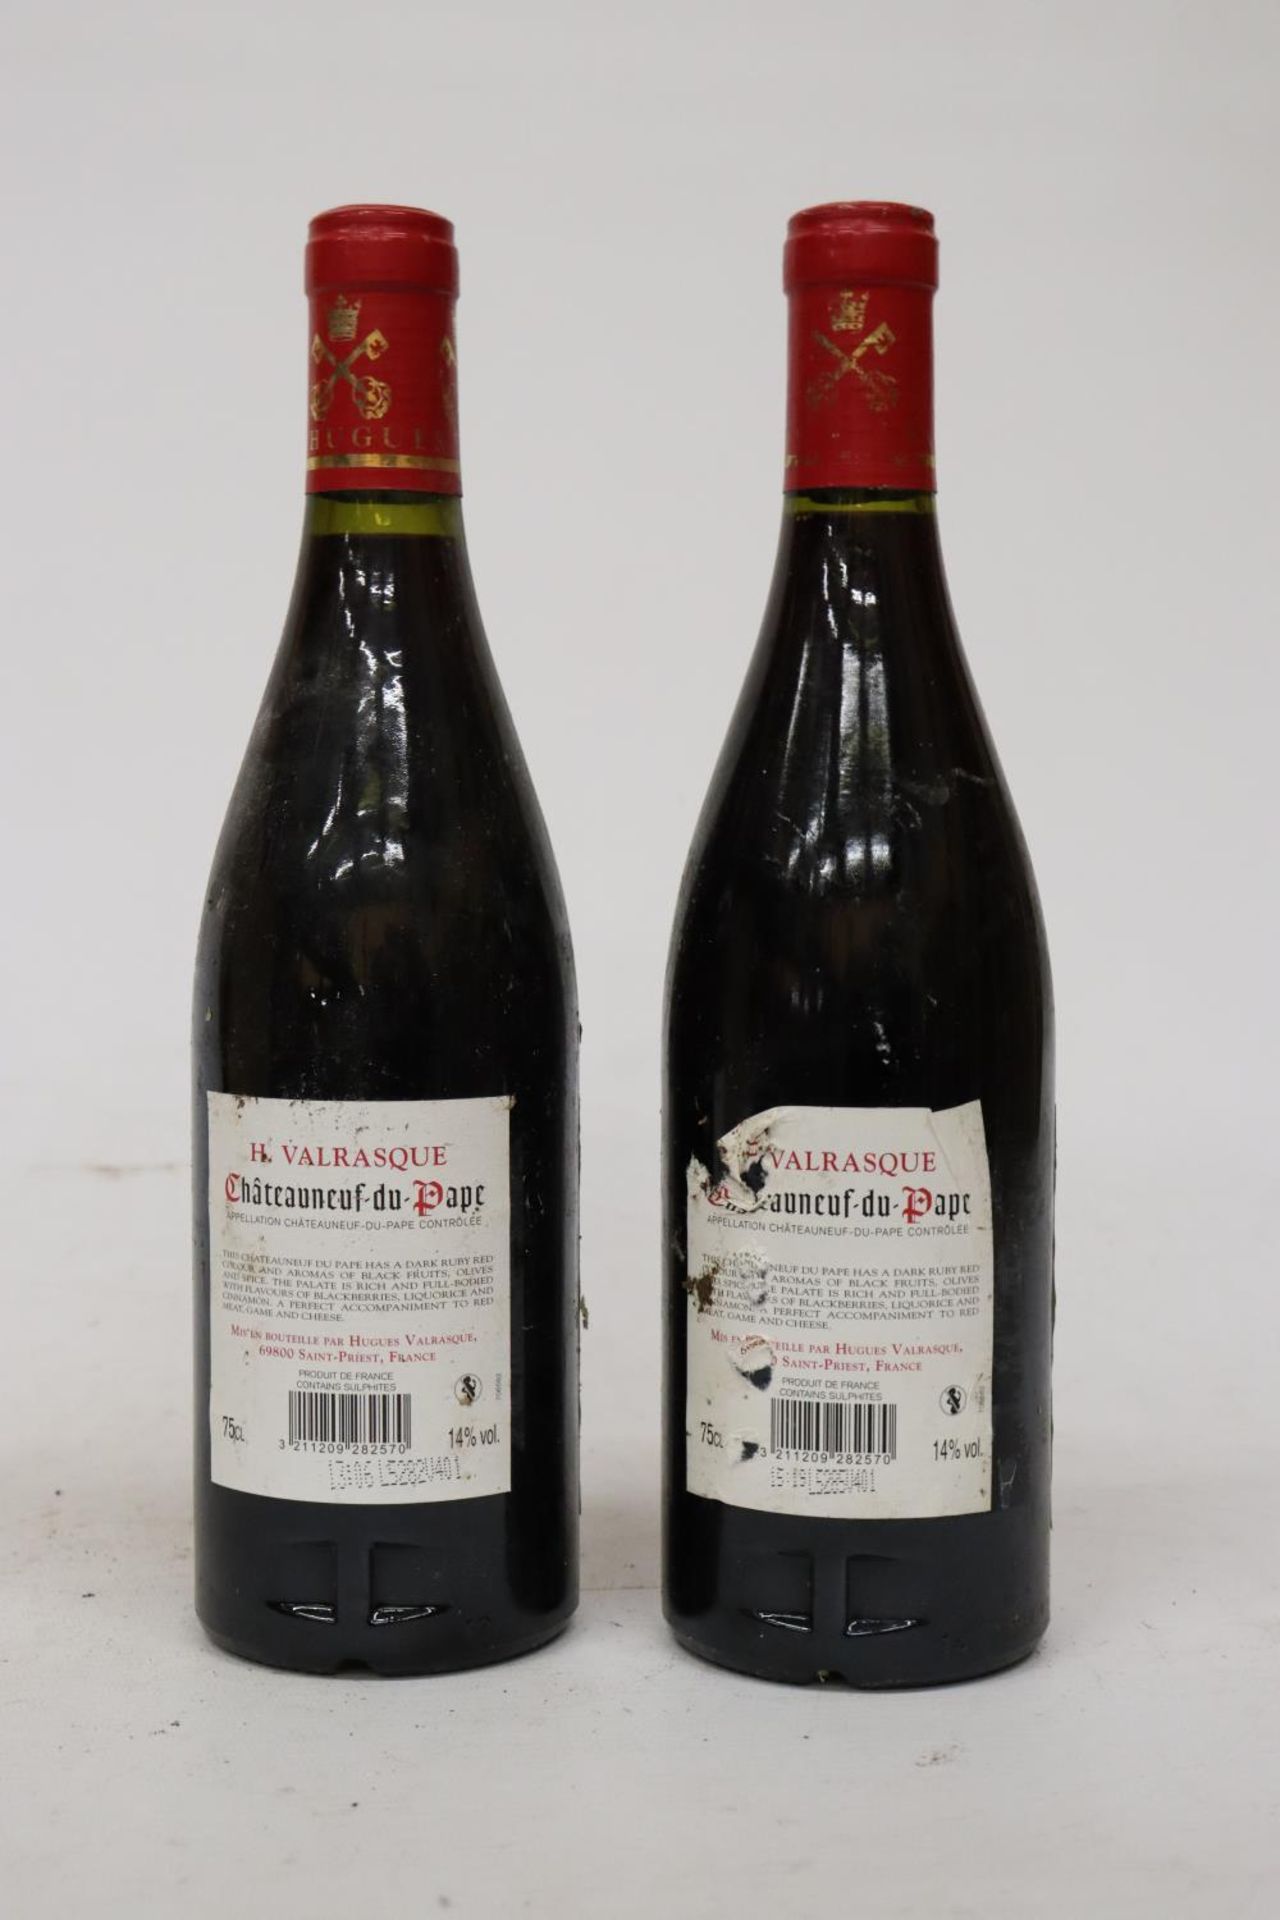 TWO BOTTLES OF H. VALRASQUE CHATEAUNEUF-DU-PAPE 2014 RED WINE - Image 2 of 3